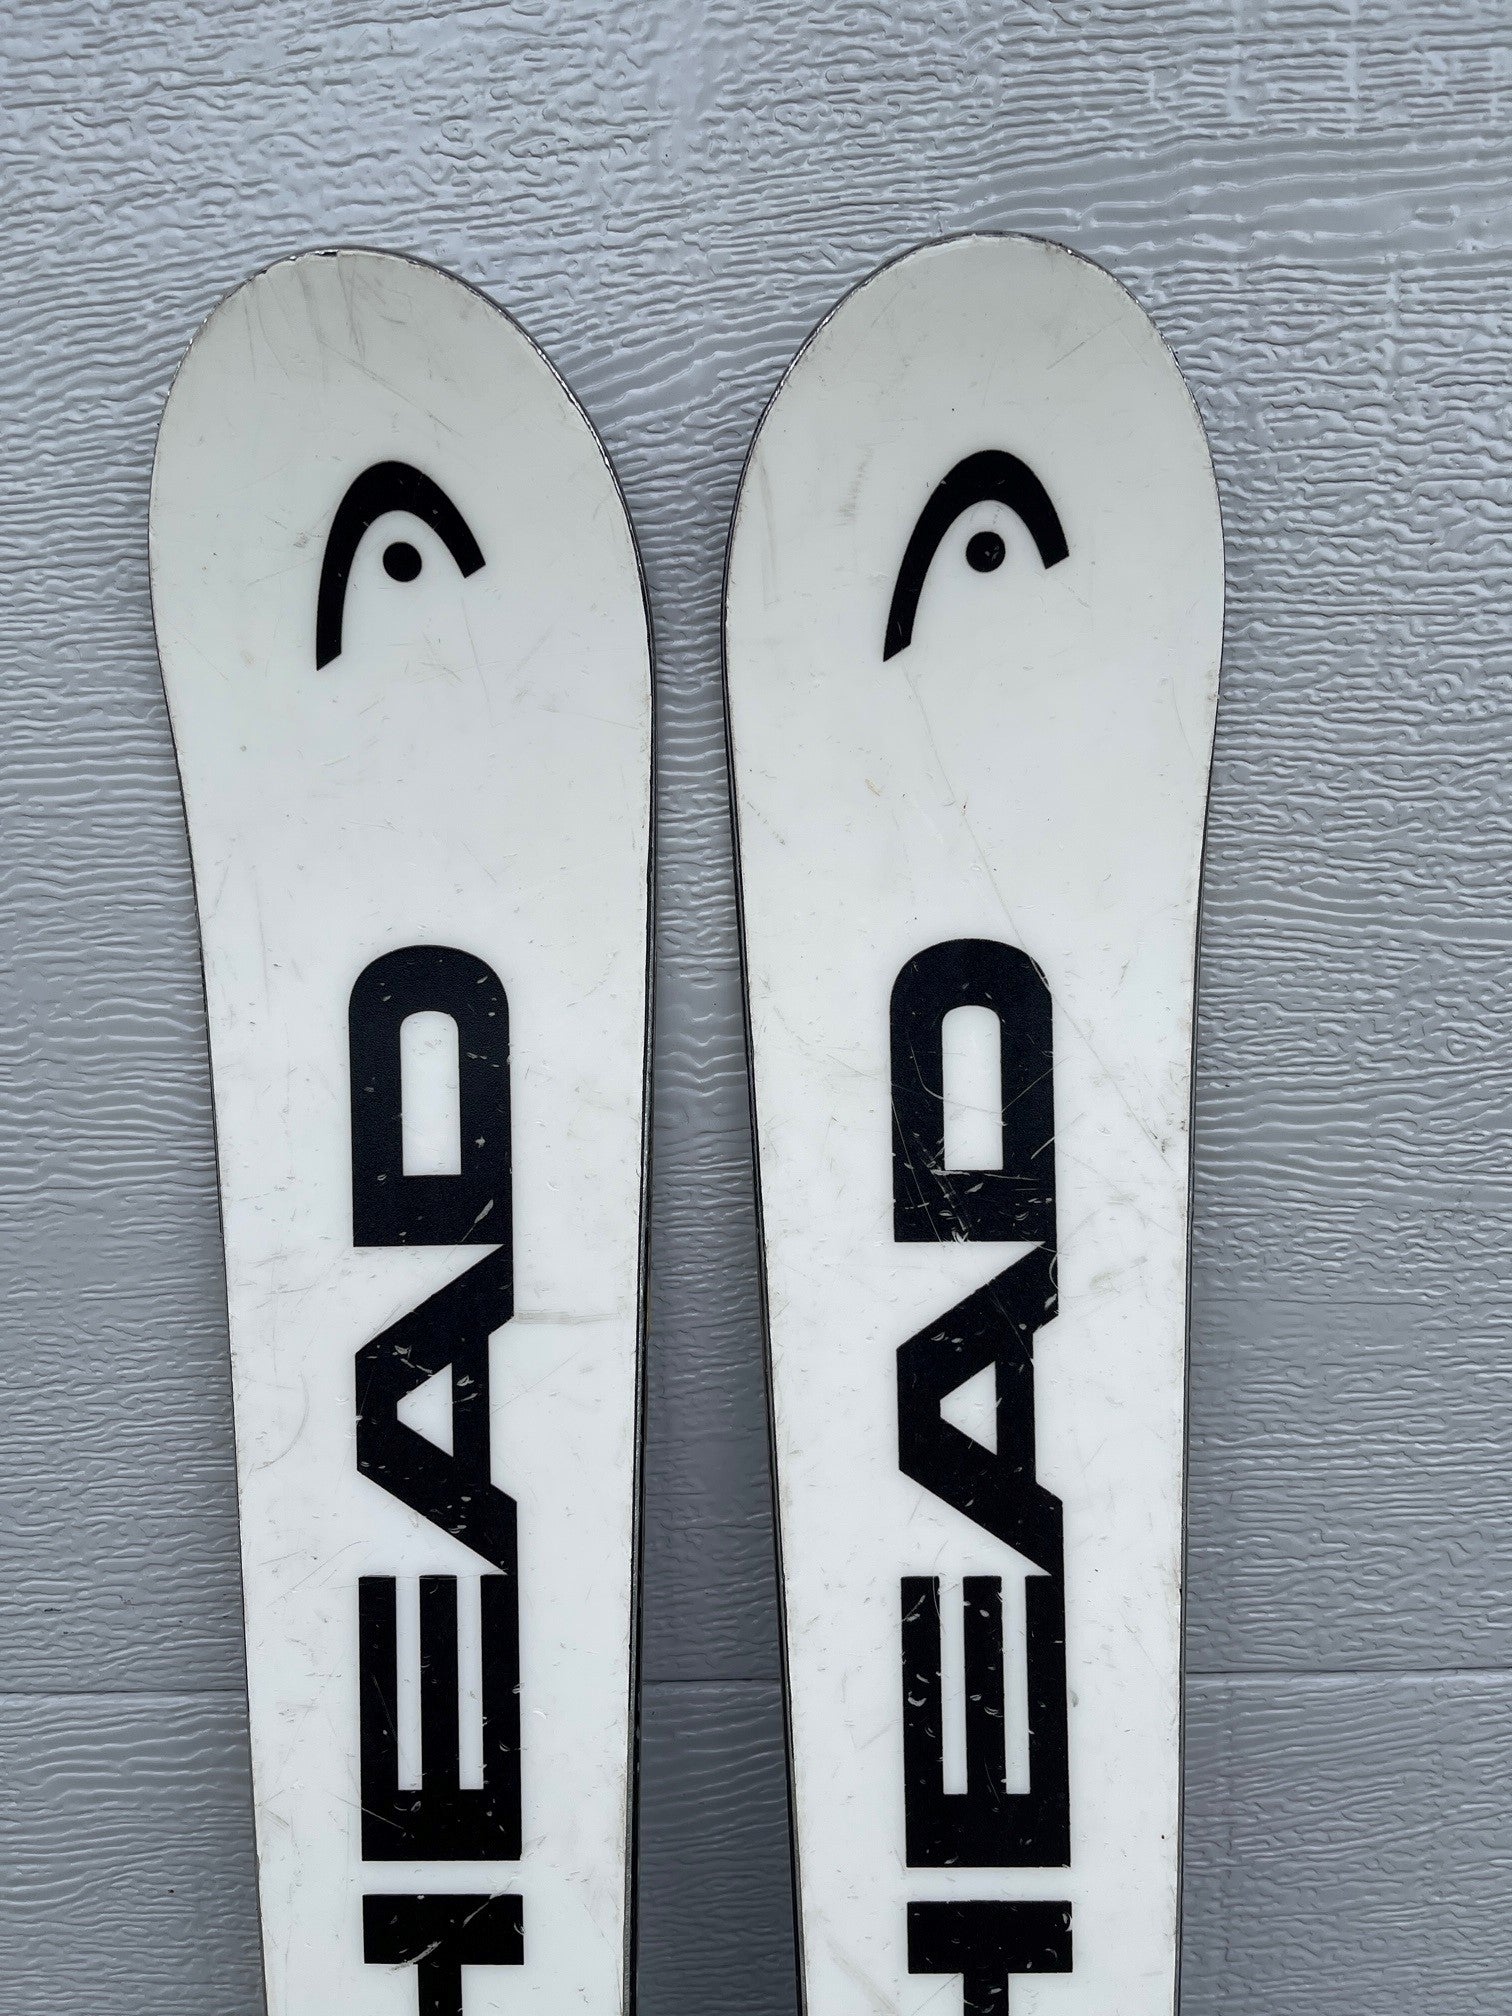 HEAD 152 cm World Cup Rebels i.GS RD Skis no bindings - used